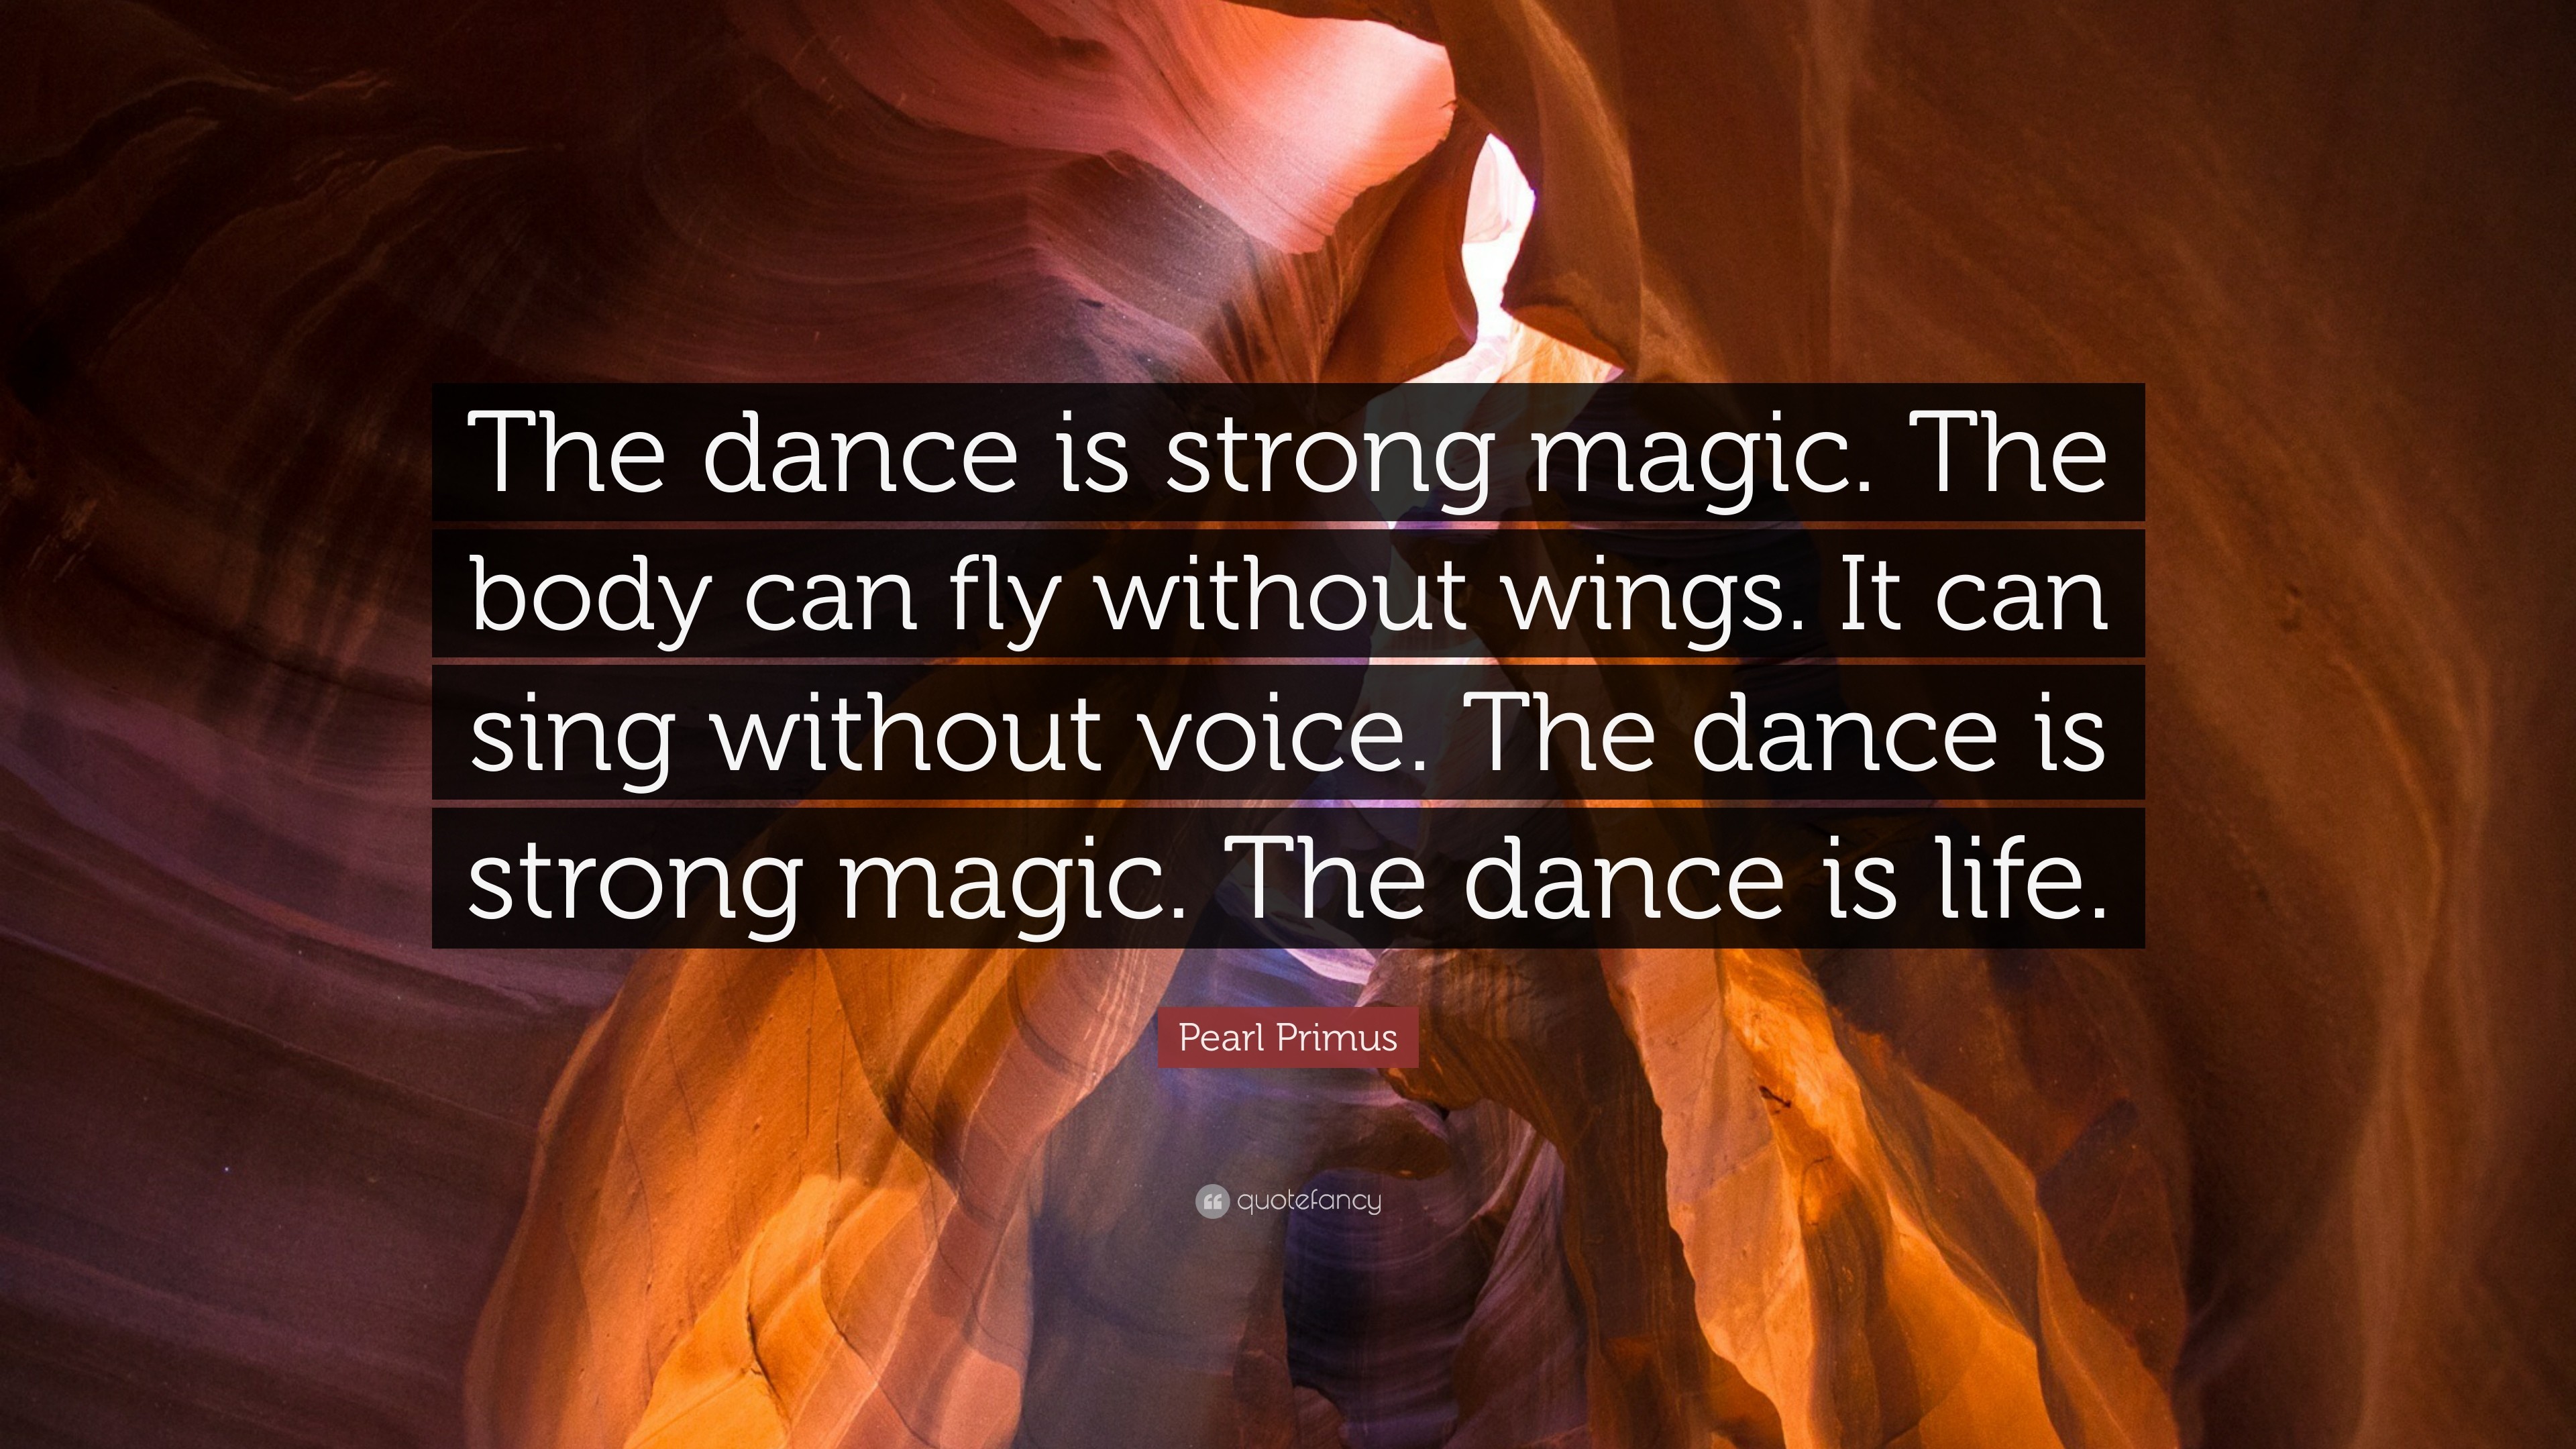 3840x2160 Pearl Primus Quote: “The dance is strong magic. The body can fly without